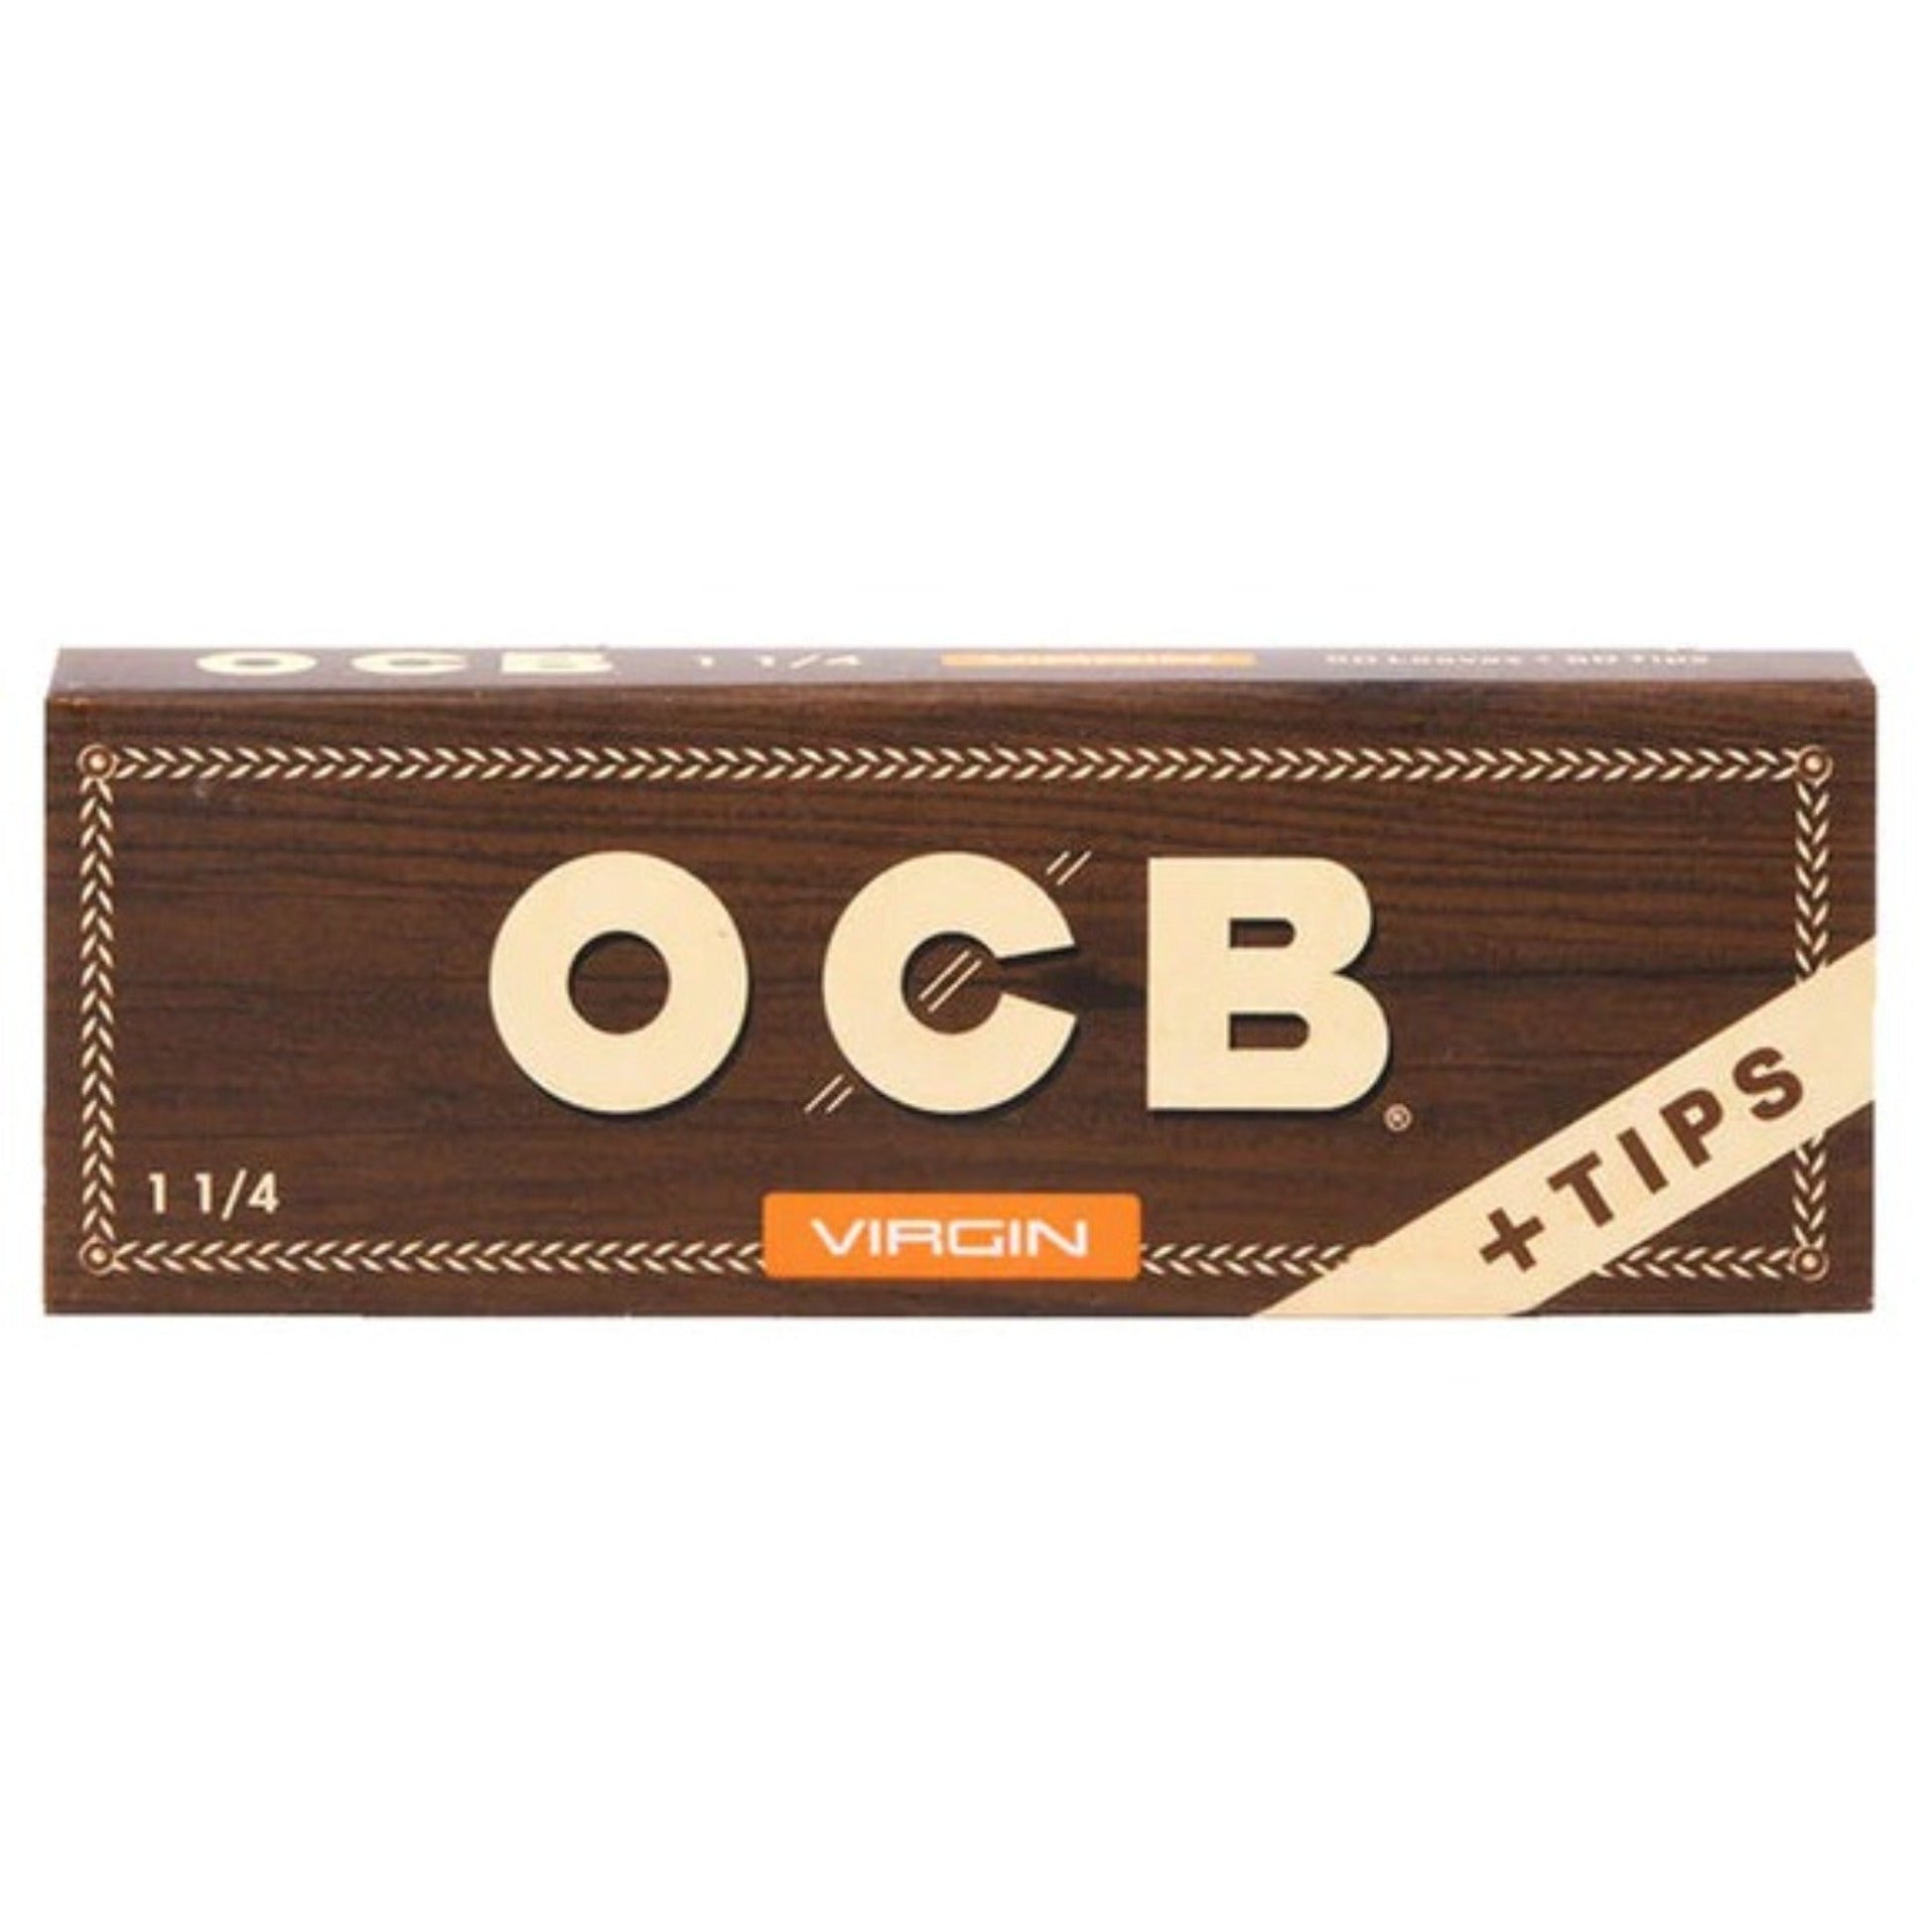 OCB Papers + Tips Unbleached Virgin / 1 1/4